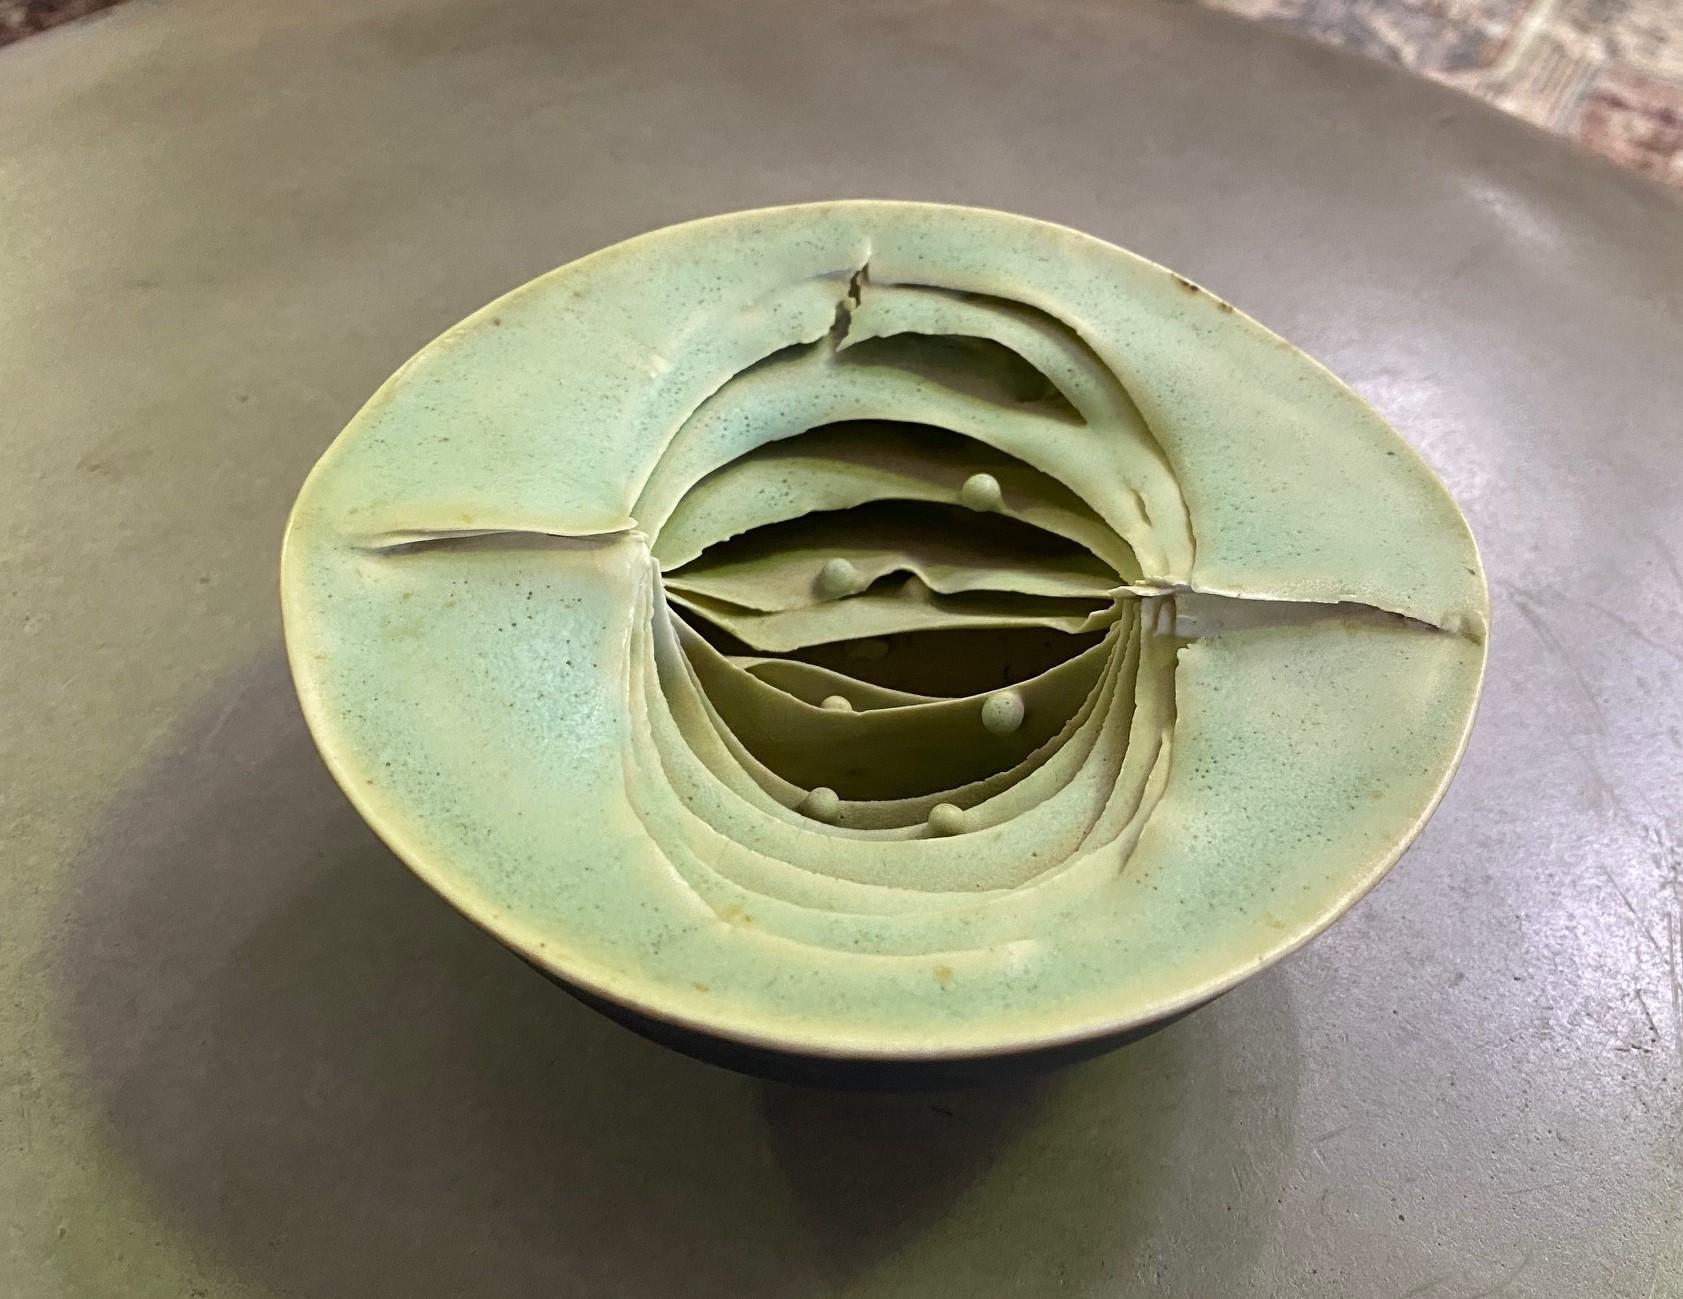 A wonderful free-form organic bowl vessel by acclaimed British potter Peter Simpson. 

Simpson's works, such as this early piece, are inspired by organic forms in nature such as pomegranates, mushrooms, poppy seedpods. etc. This rounded bowl form,